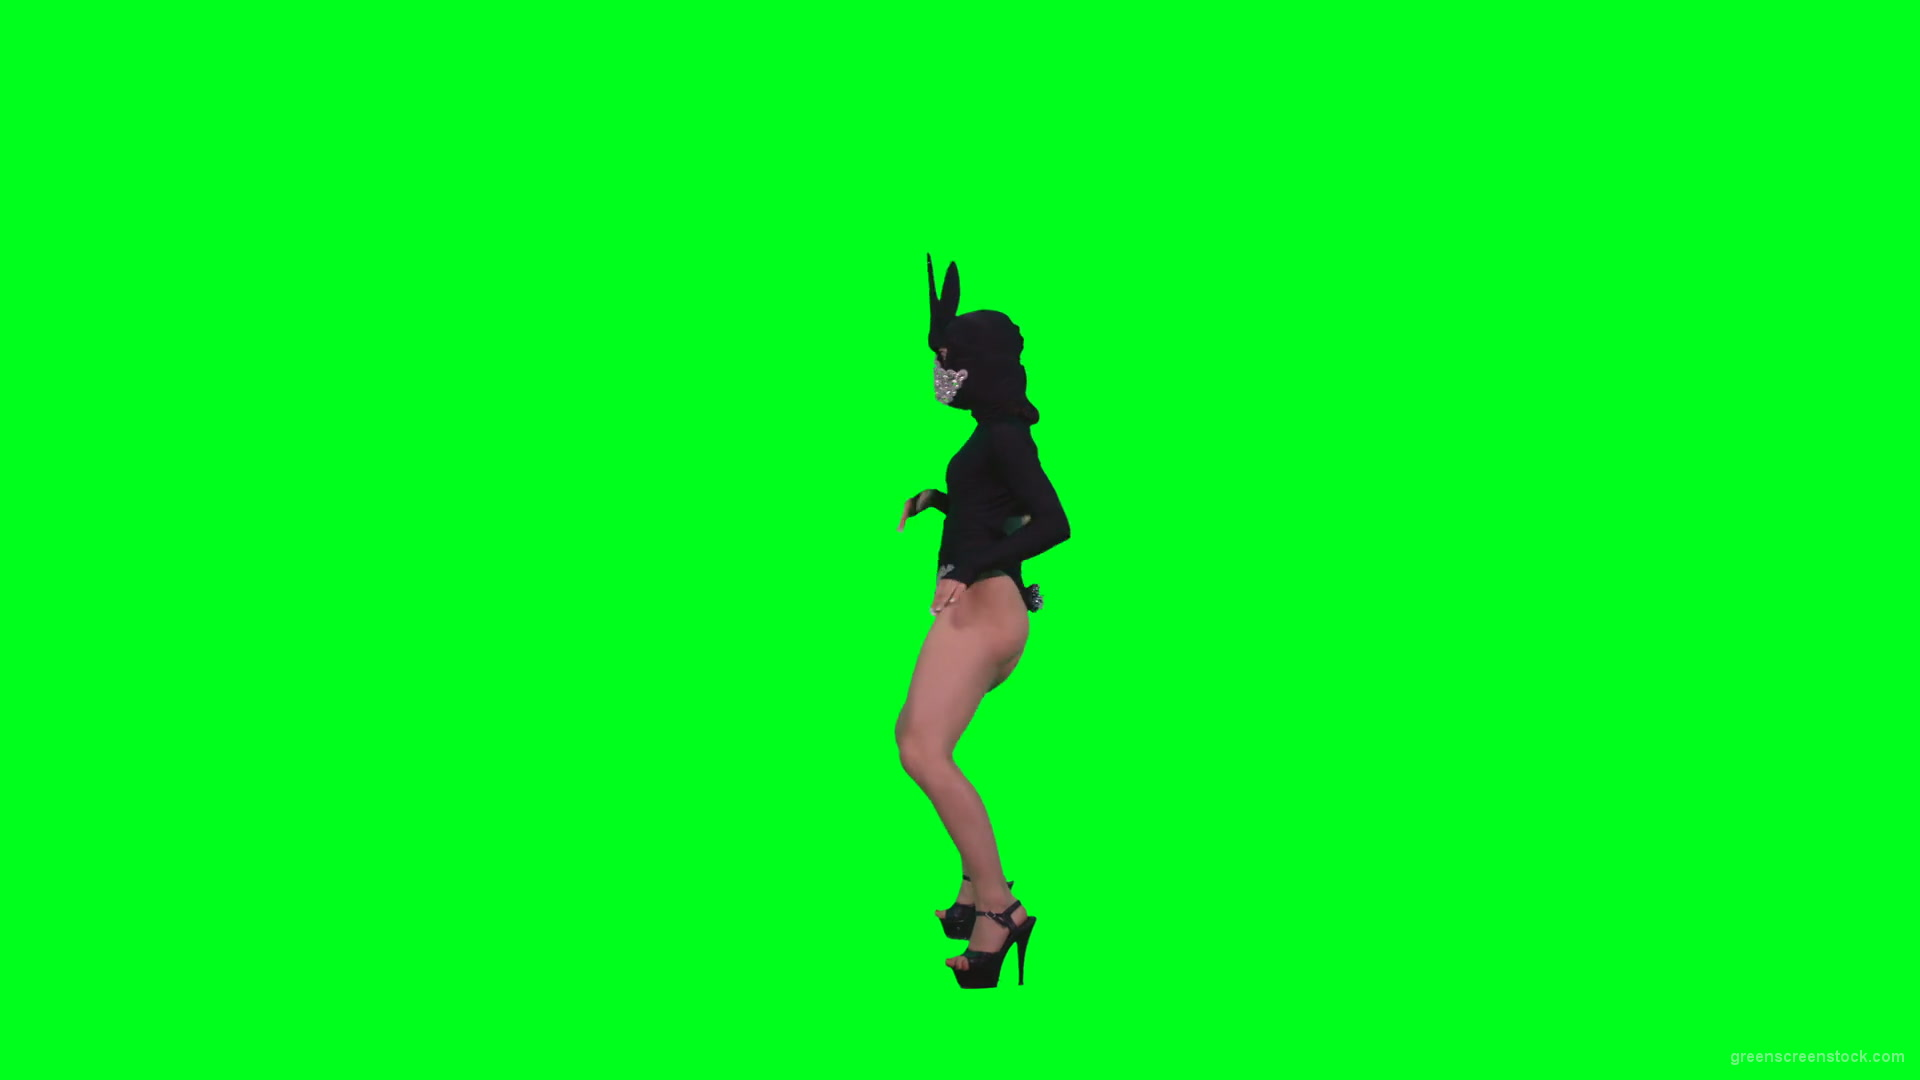 Girl-in-Black-Bunny-Costume-squatting-in-go-go-style-isolated-on-green-screen-4K-Video-Footage-1-1920_009 Green Screen Stock